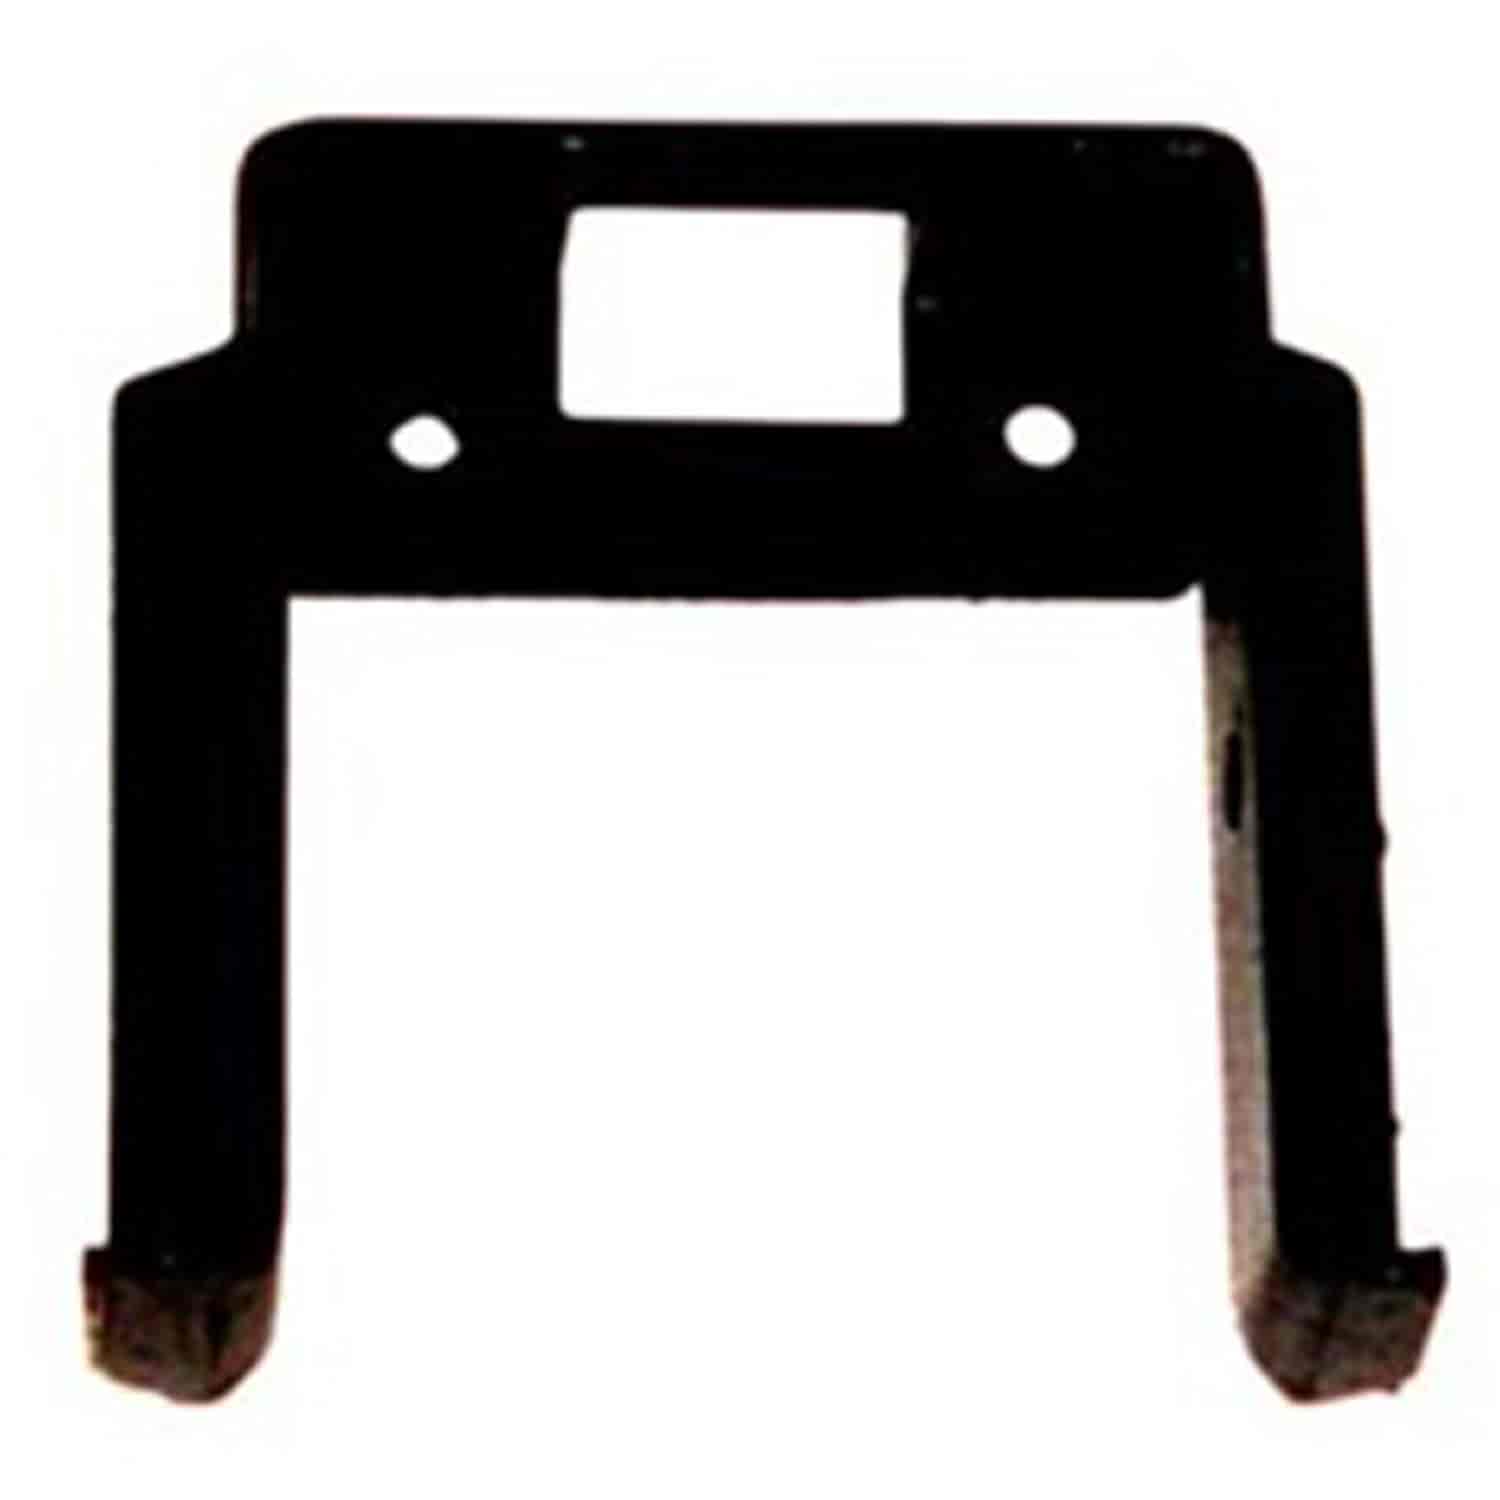 This reproduction rear seat to wheelhouse support from